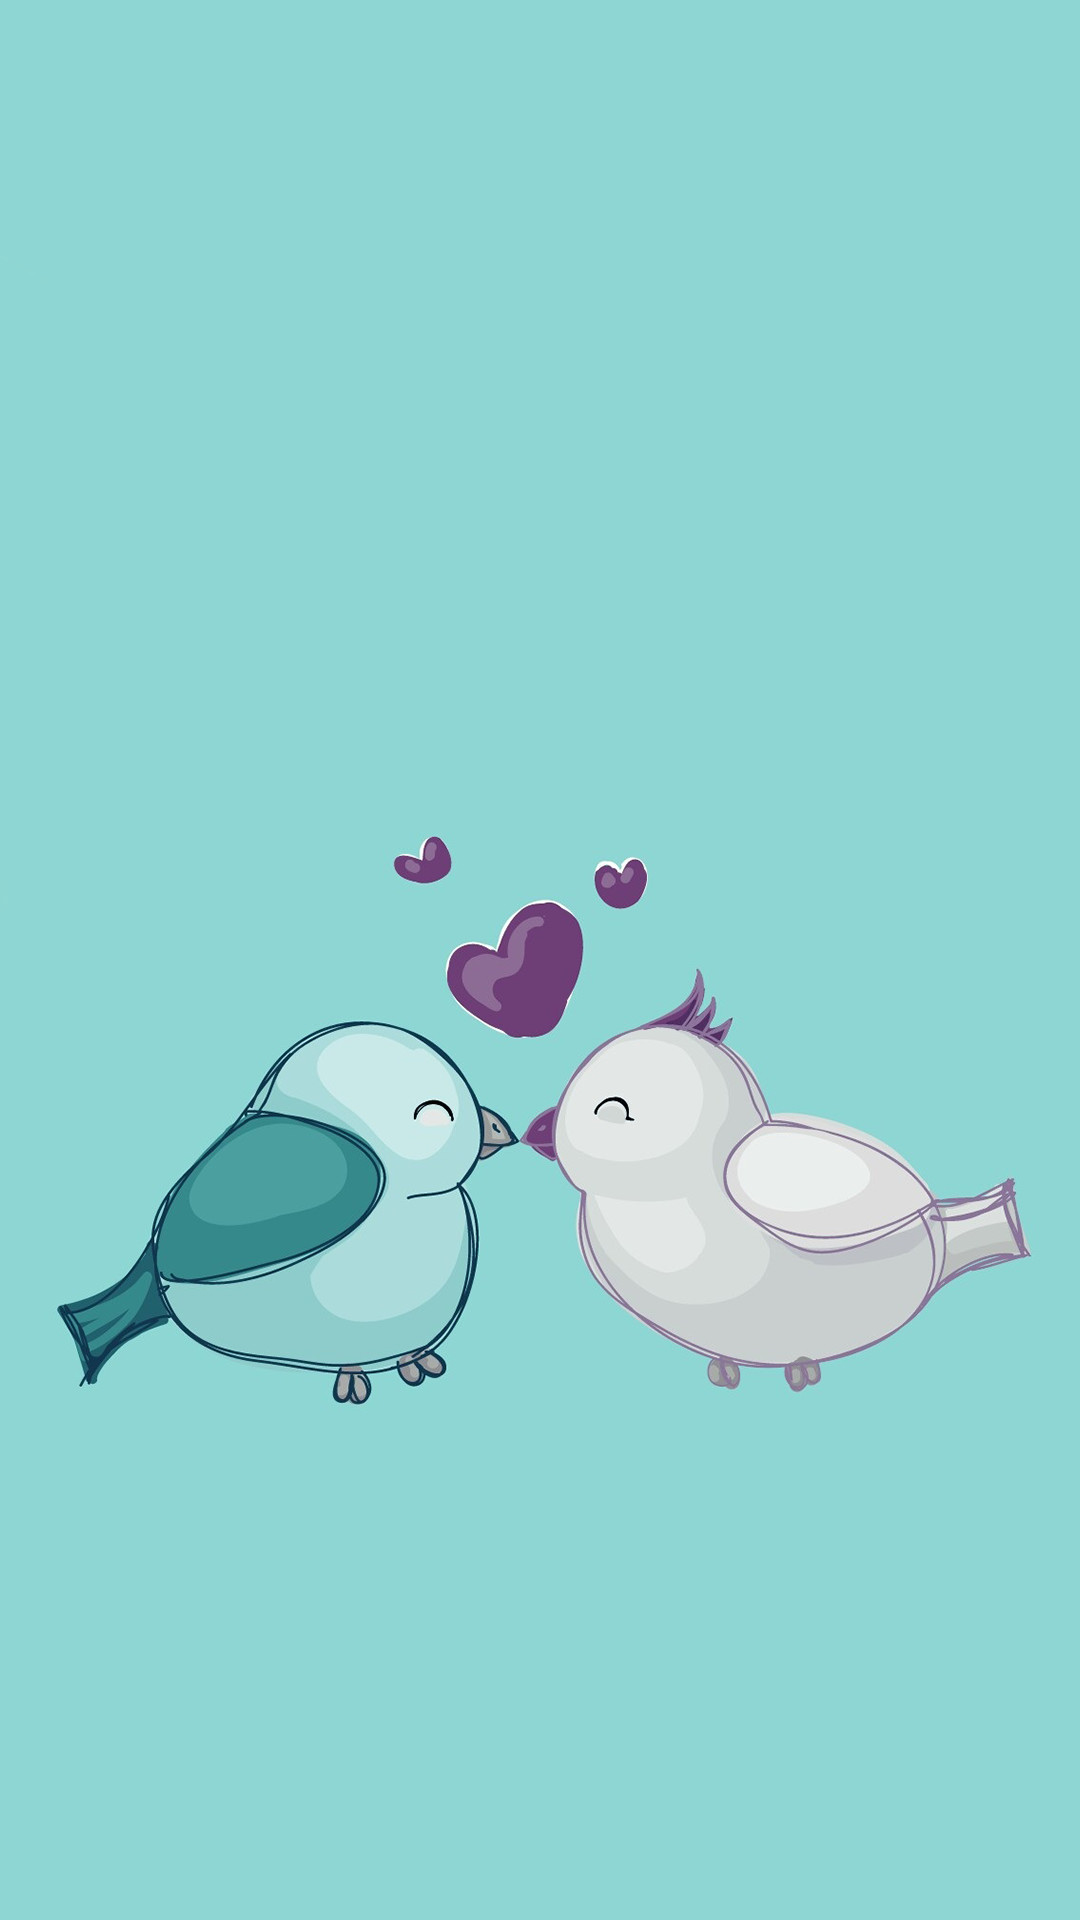 1080x1920 Tap to see more Valentine's Love iPhone & Android wallpapers, backgrounds,  fondos!